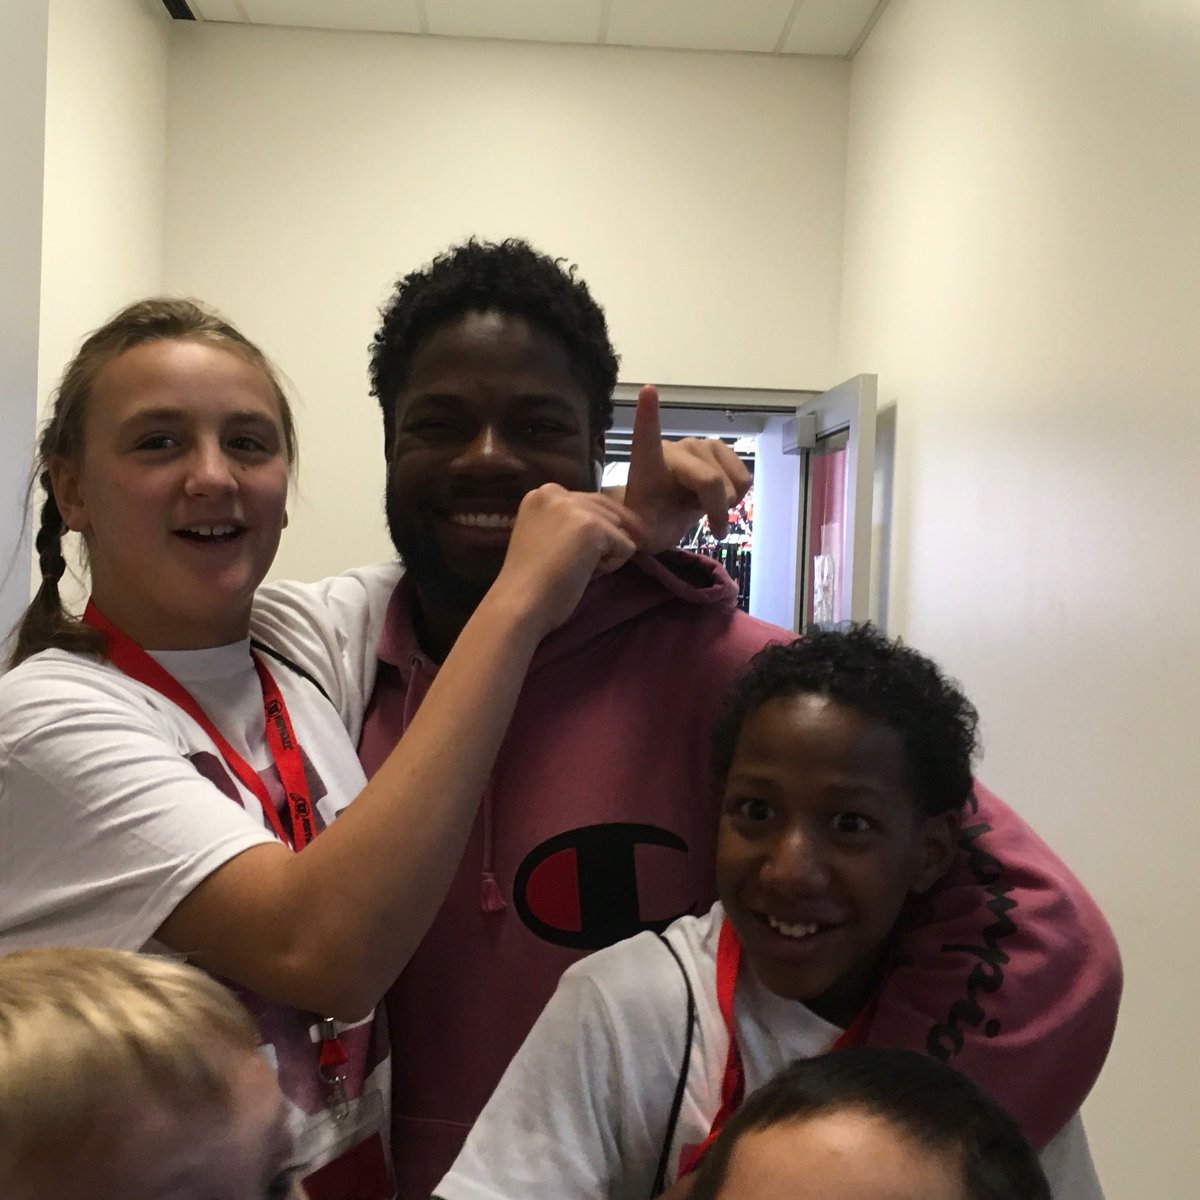  @Ezmoneylowe who stopped his run to come see my class.  @DevontaeHenry who was swarmed by my students who sometimes struggle with personal space. Orlando Umana who took time to hang out with a student physically unable to participate and make her feel special.